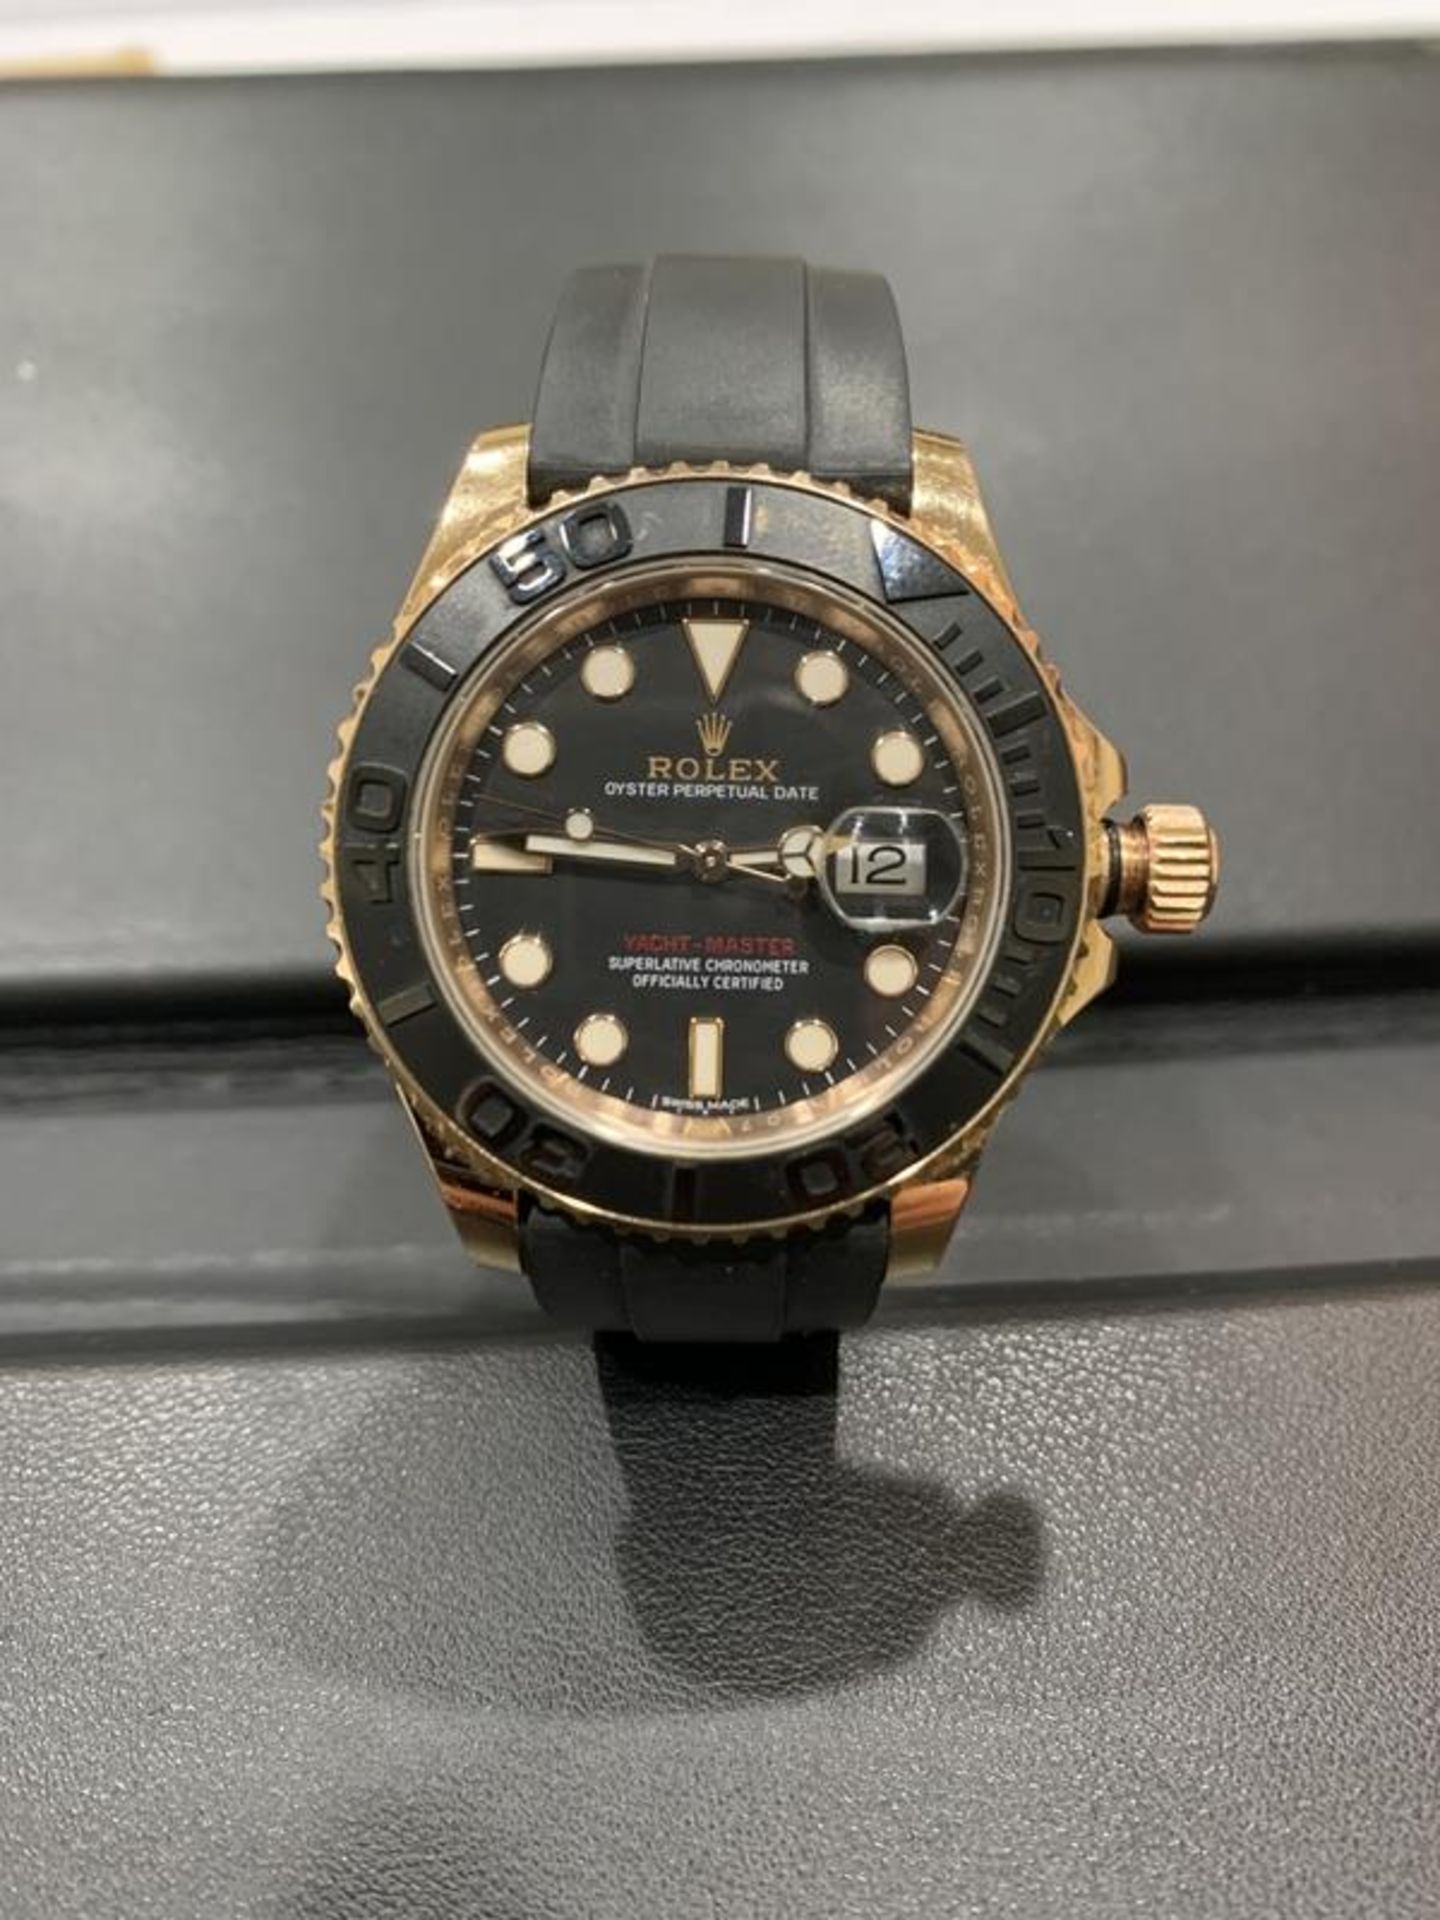 ROLEX Yacht-Master Mens 40mm everose gold, black face - no box or paperwork included - Serial: